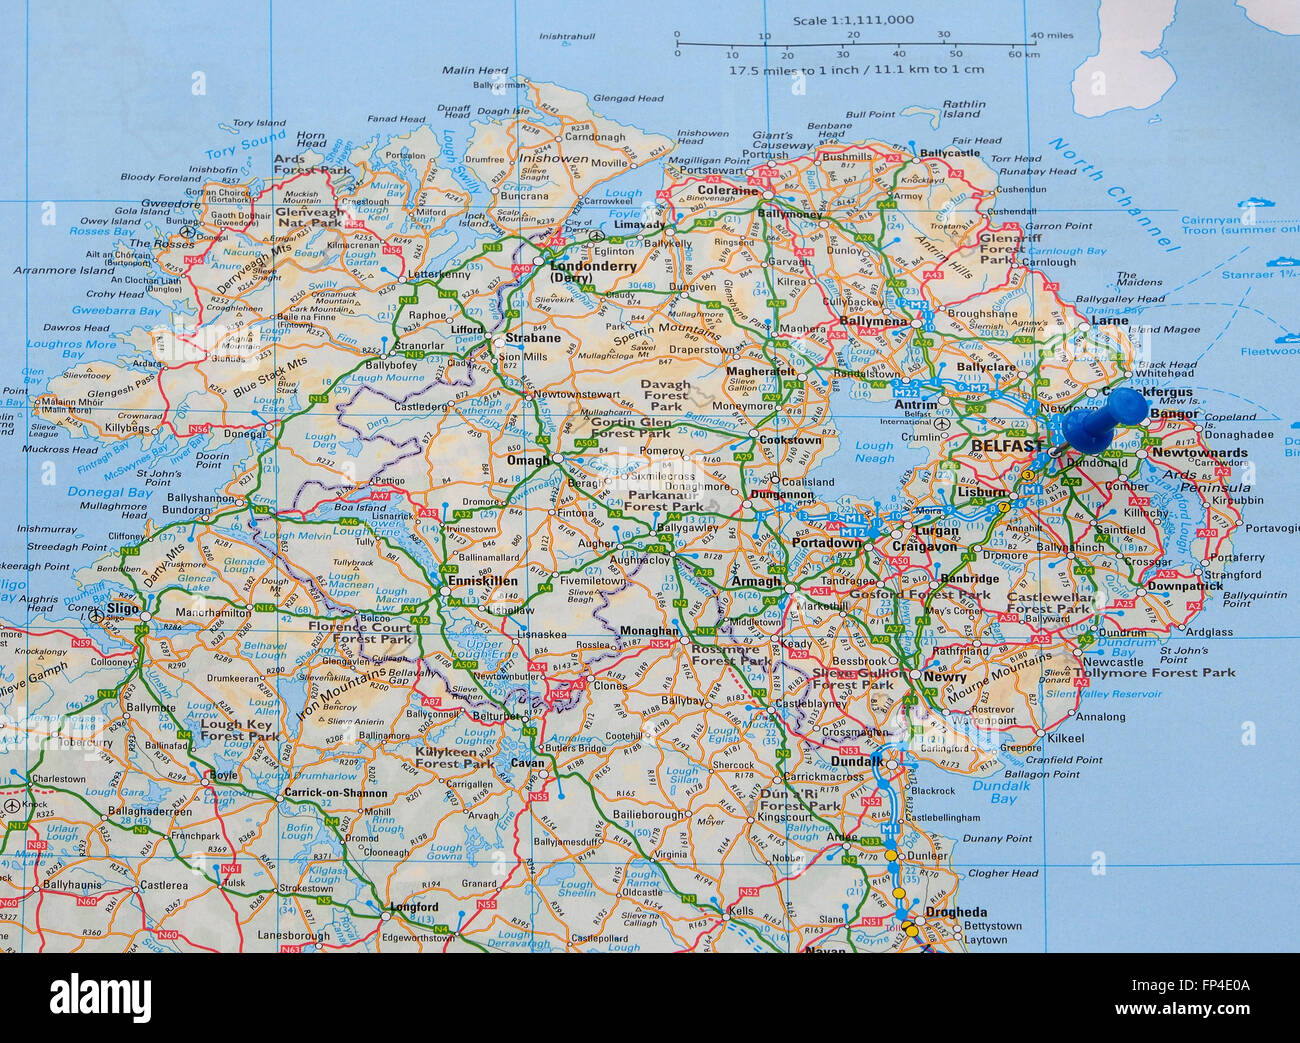 Road map of Northern Ireland, with a map pin indicating Belfast, in County Antrim, the capital of Northern Ireland. Stock Photo